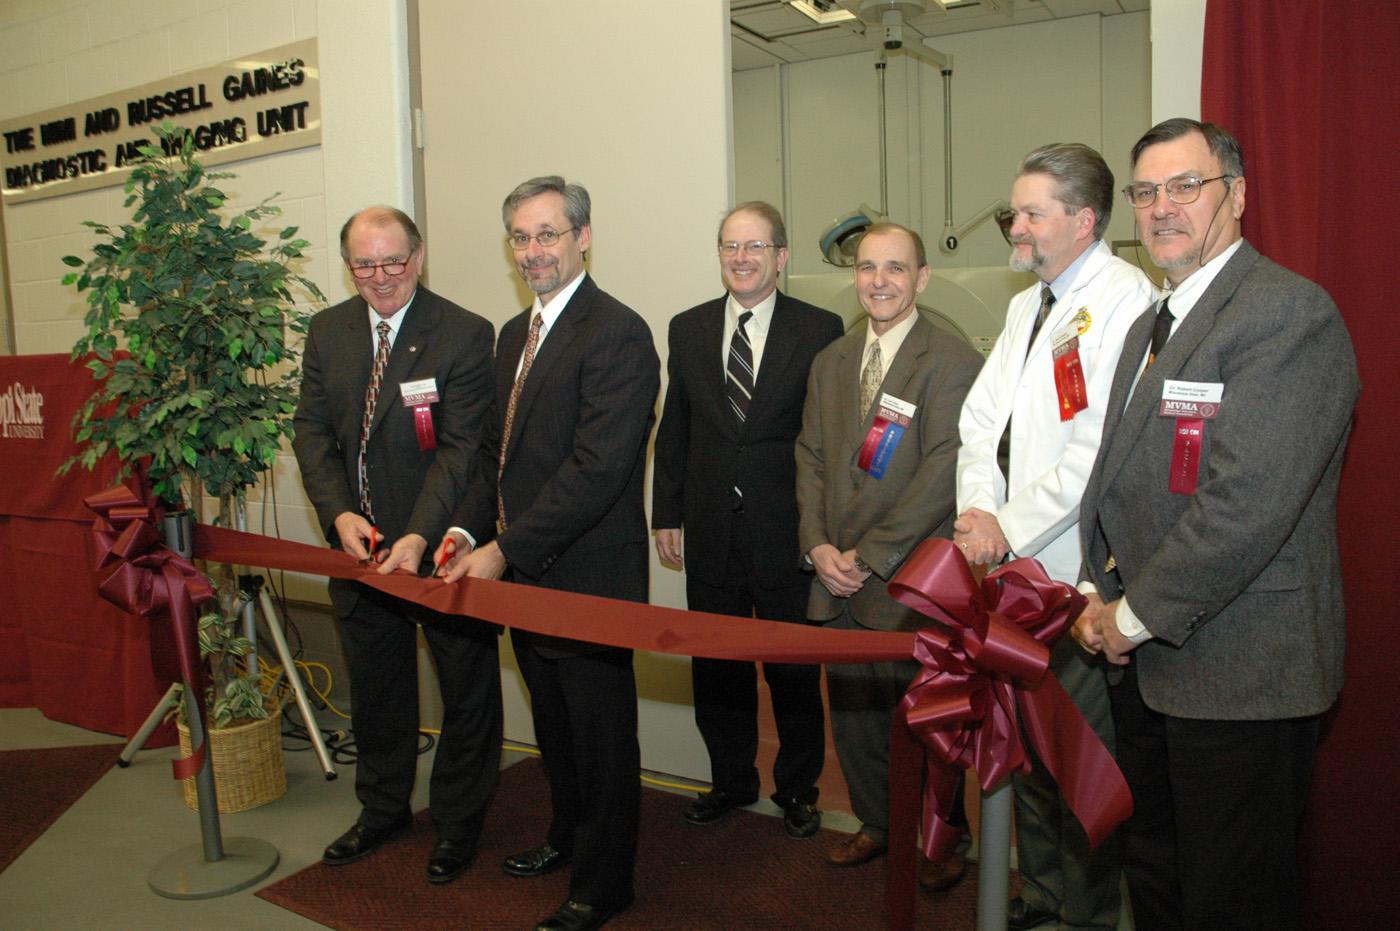 Pictured at the ribbon cutting ceremony, from left, are Dr. Gregg Boring, interim CVM dean; Russell Gaines, donor; Dr. Colin Scanes, CVM vice president for research and graduate studies; Dr. Lee Tyner, director of the Animal Health Center; Dr. Dan Cantwell, chief of diagnostic imaging services; and Dr. Robert Cooper, associate dean for academic affairs.